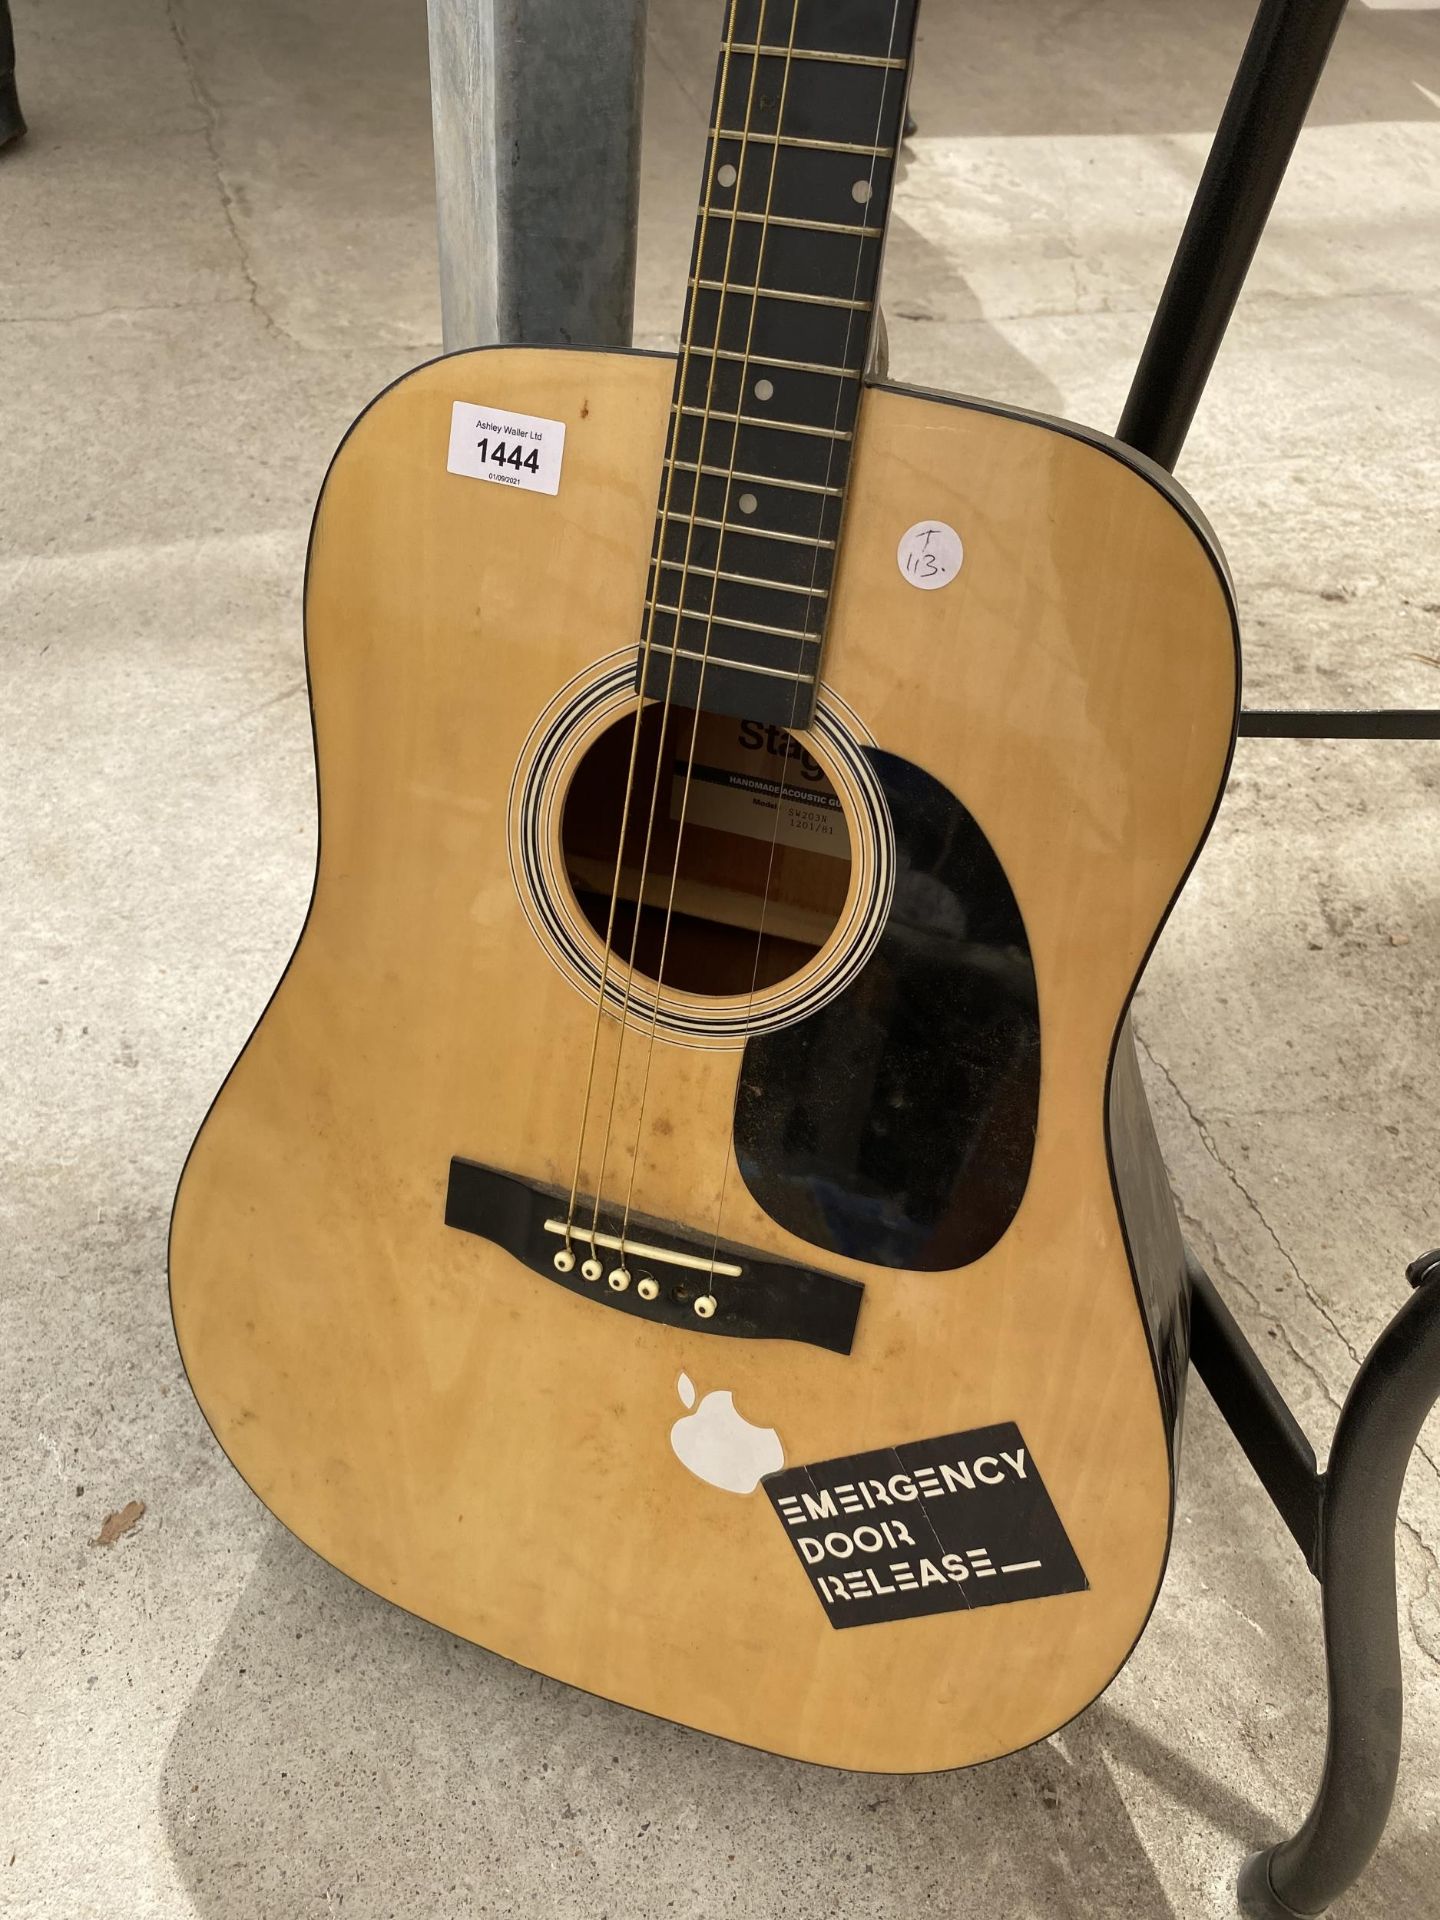 A STAGG ACOUSTIC GUITAR - Image 2 of 4